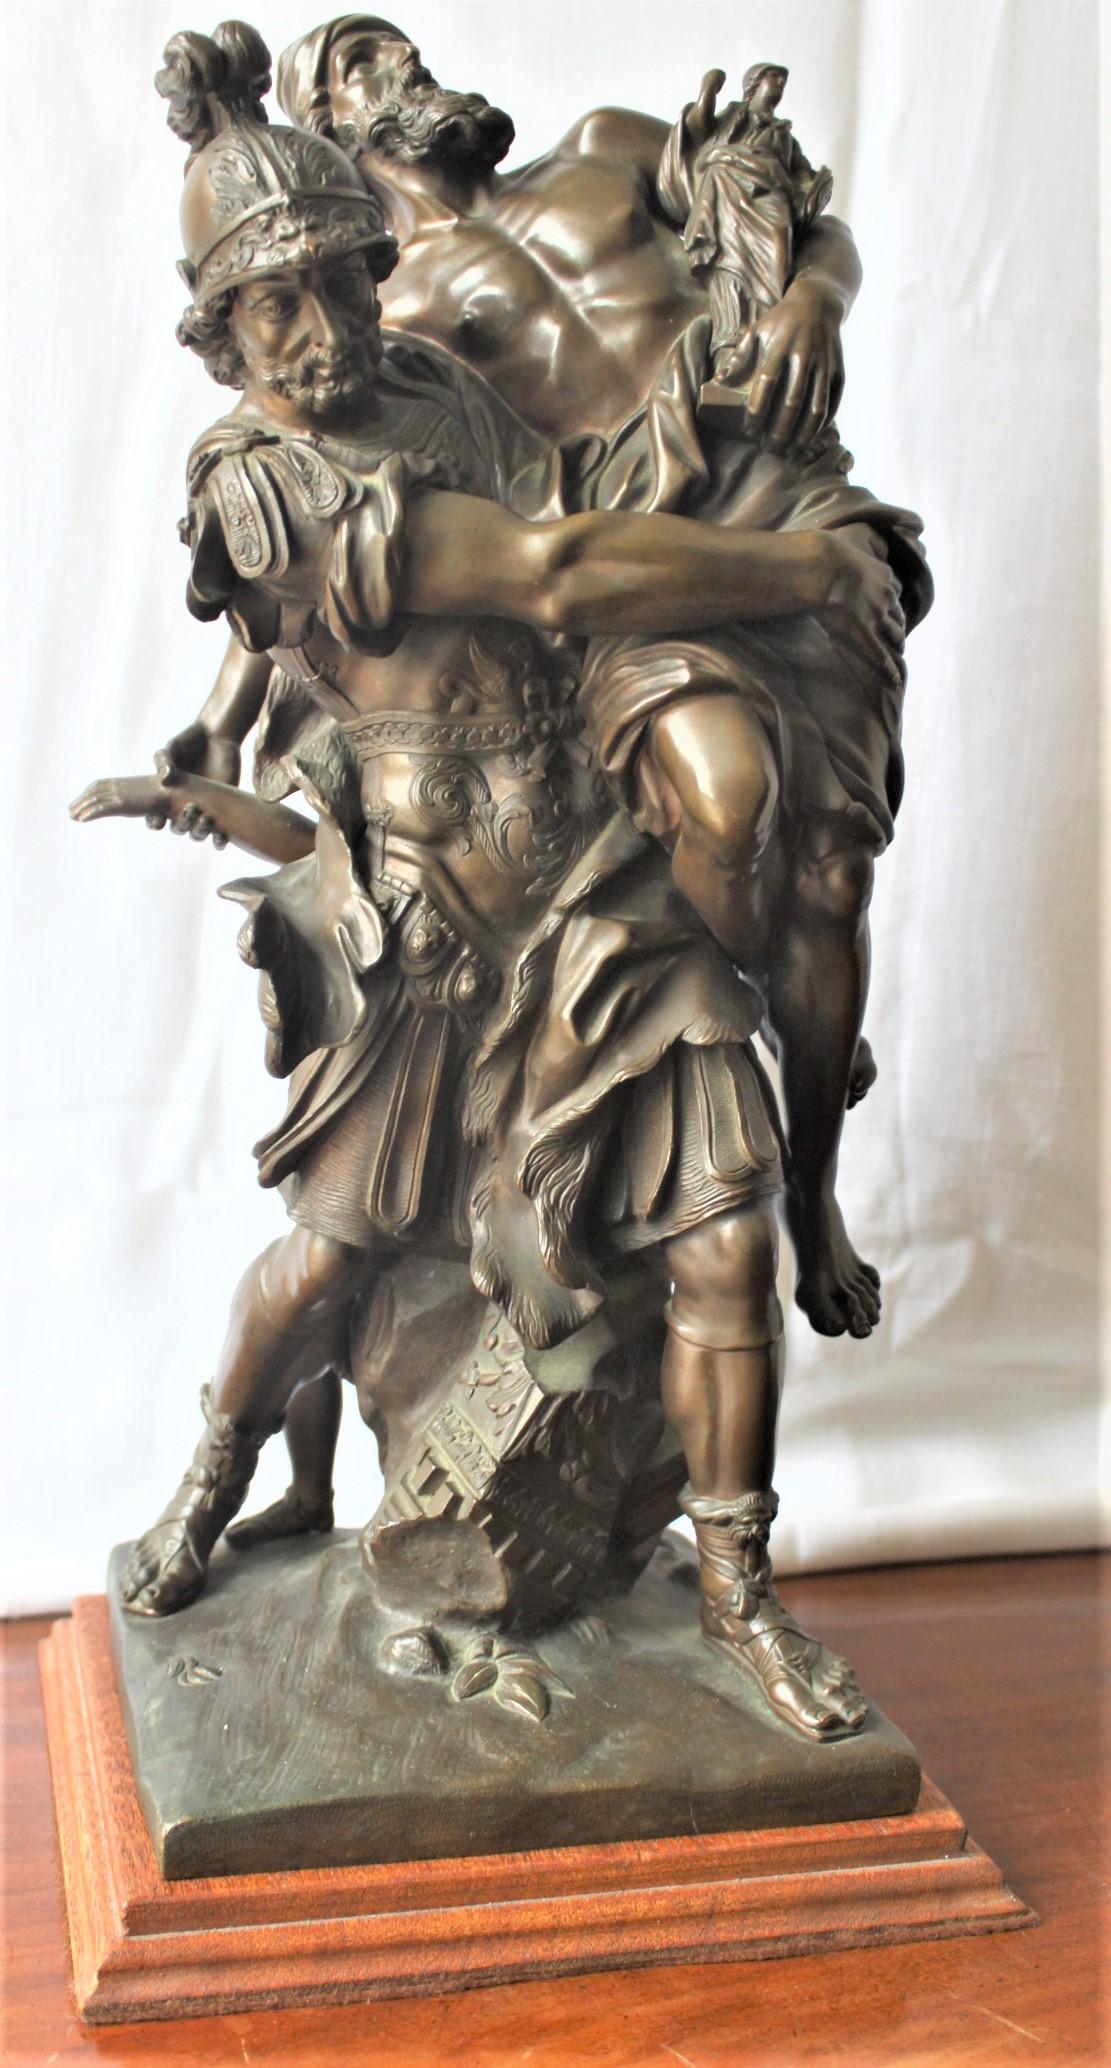 This very detailed and well executed cast antique bronze sculpture is unsigned, but presumed to have been made in France in circa 1850 in a neoclassical Revival style.